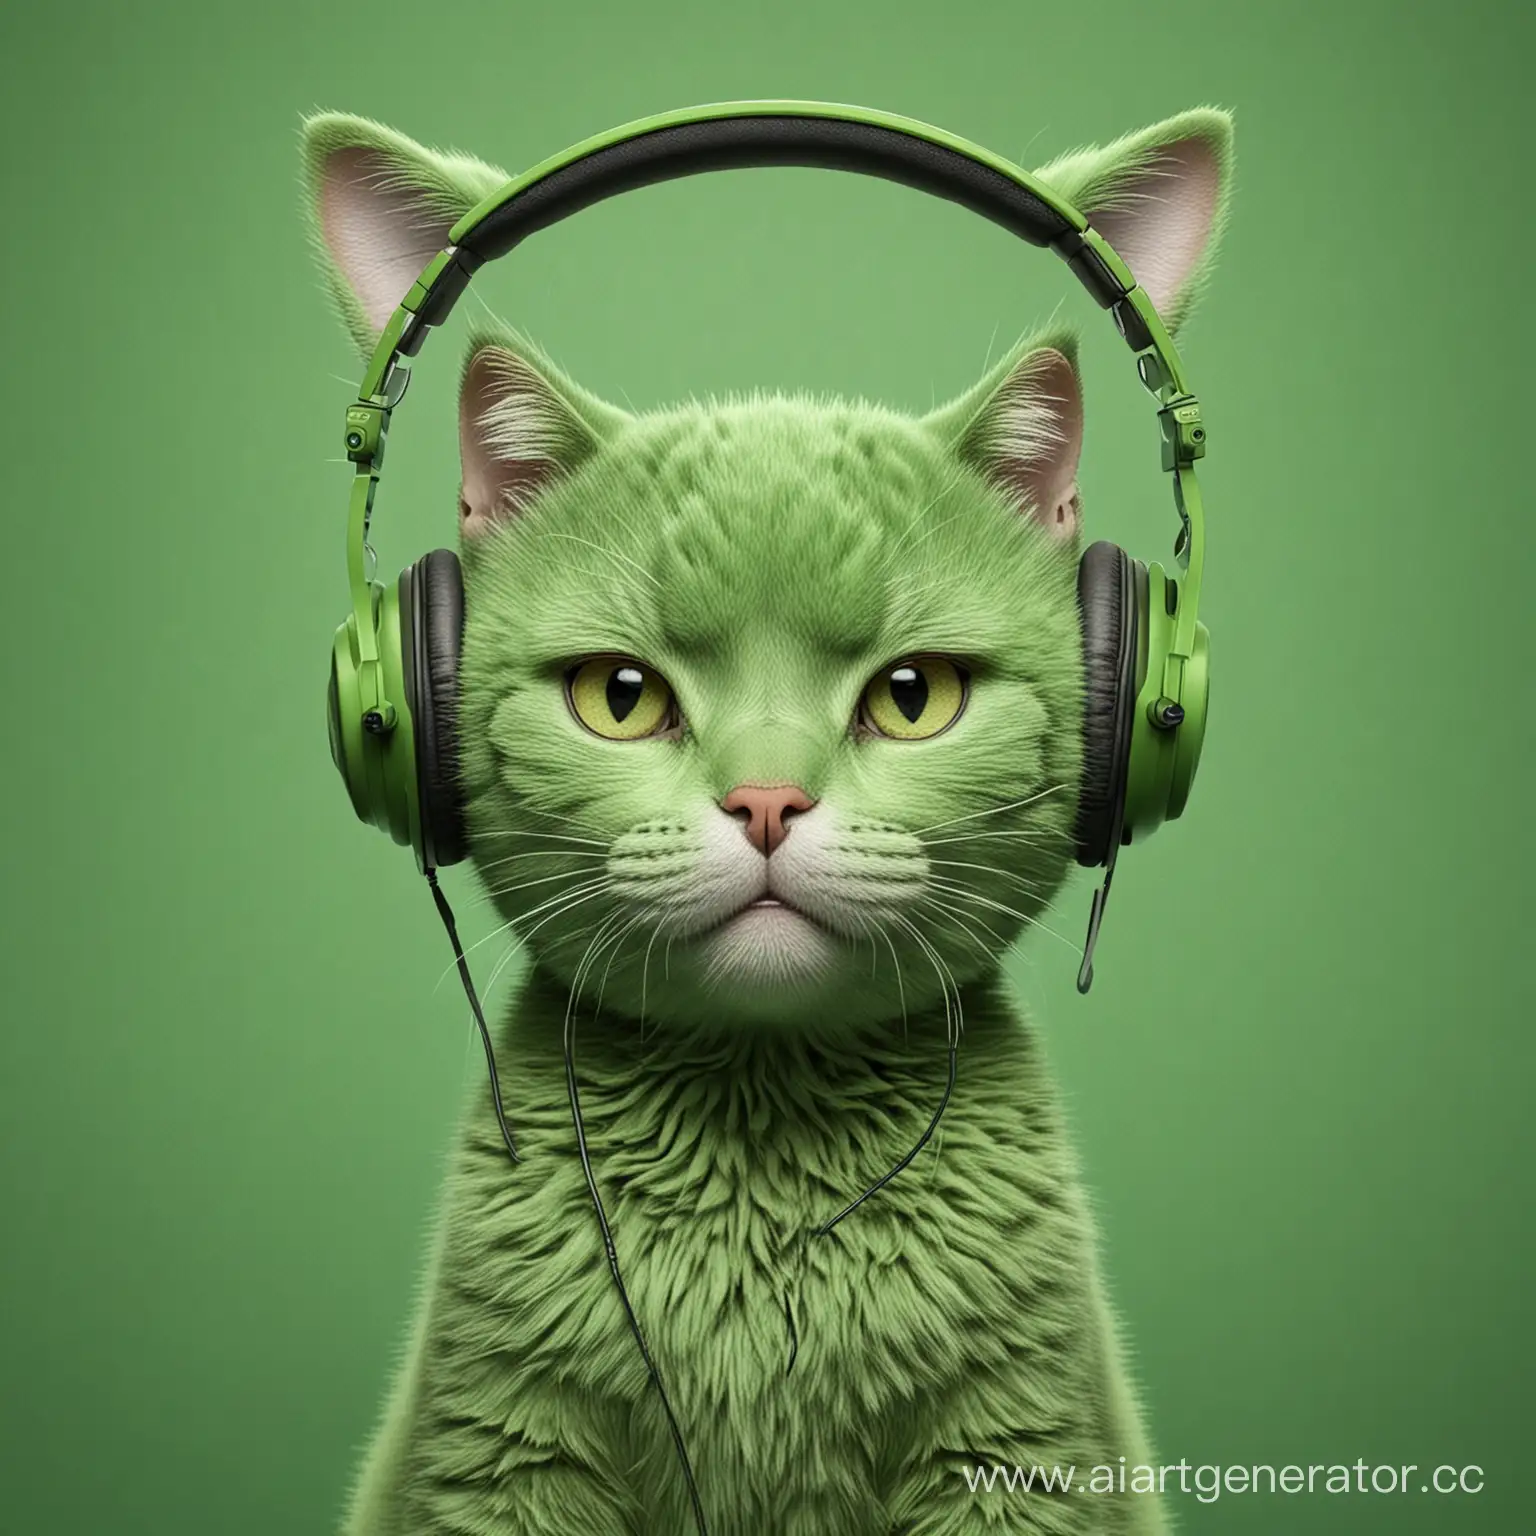 Green-Cat-with-Headphones-on-Vibrant-Green-Background